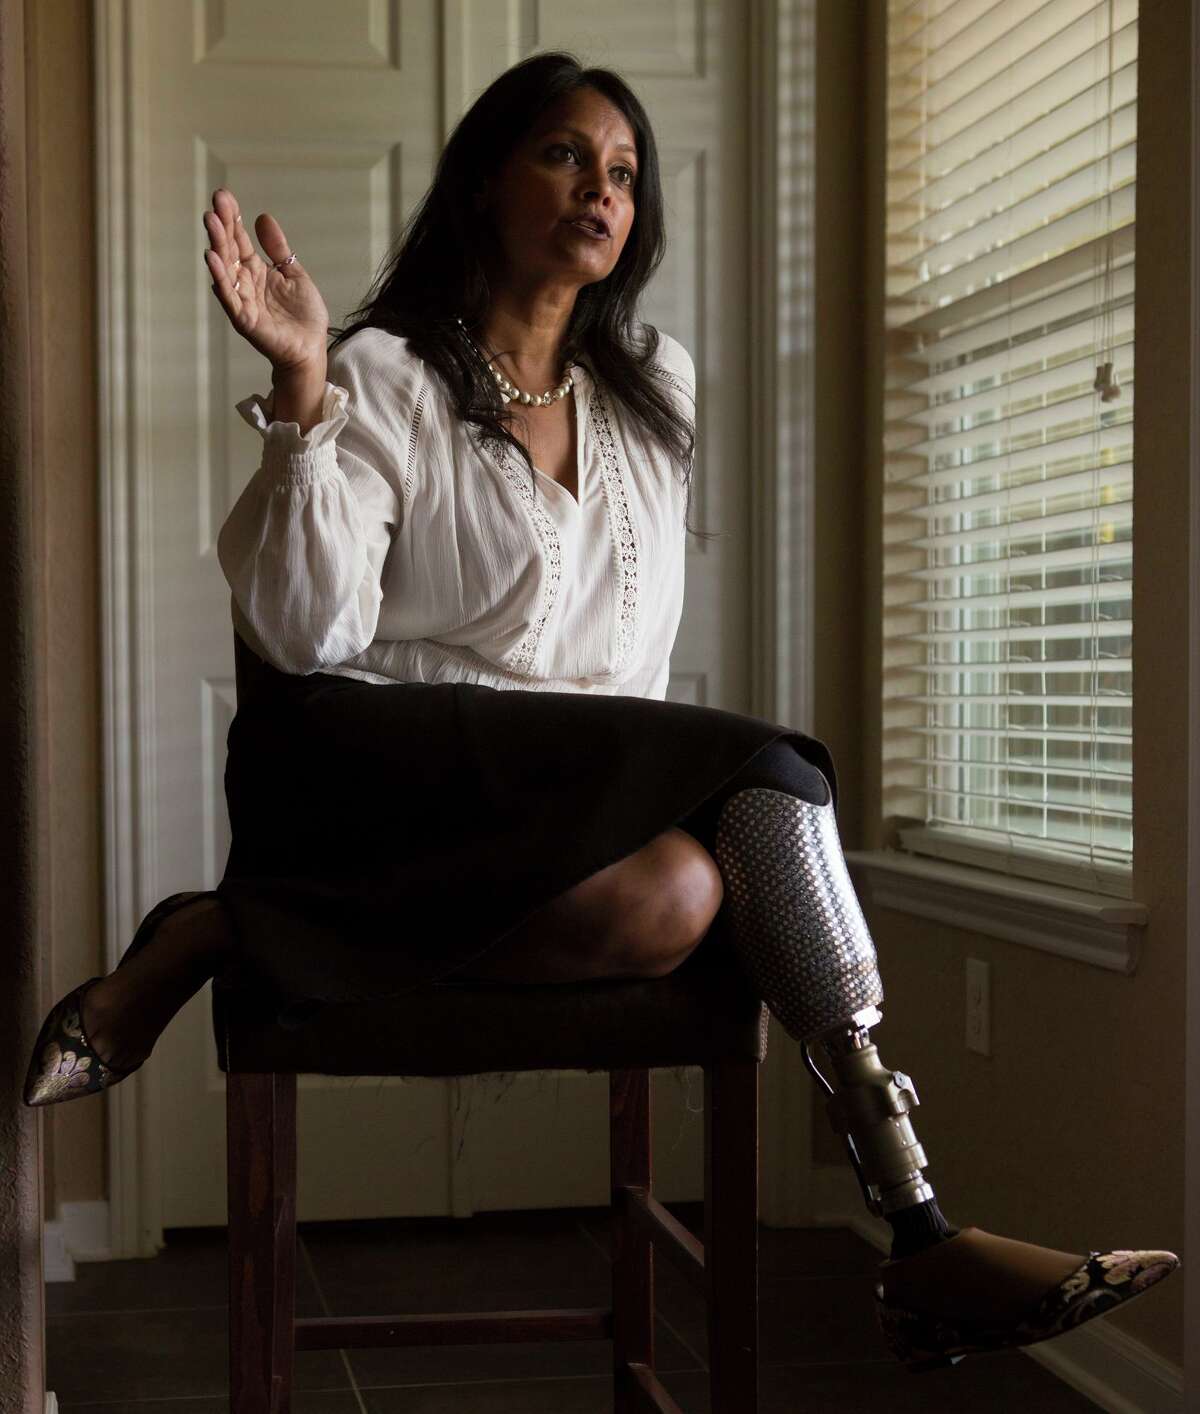 Mona Patel started the San Antonio Amputee Foundation 21 years ago after she was struck by a drunk driver and could not find a support group in the area. Today, Patel’s nonprofit has a global reach.